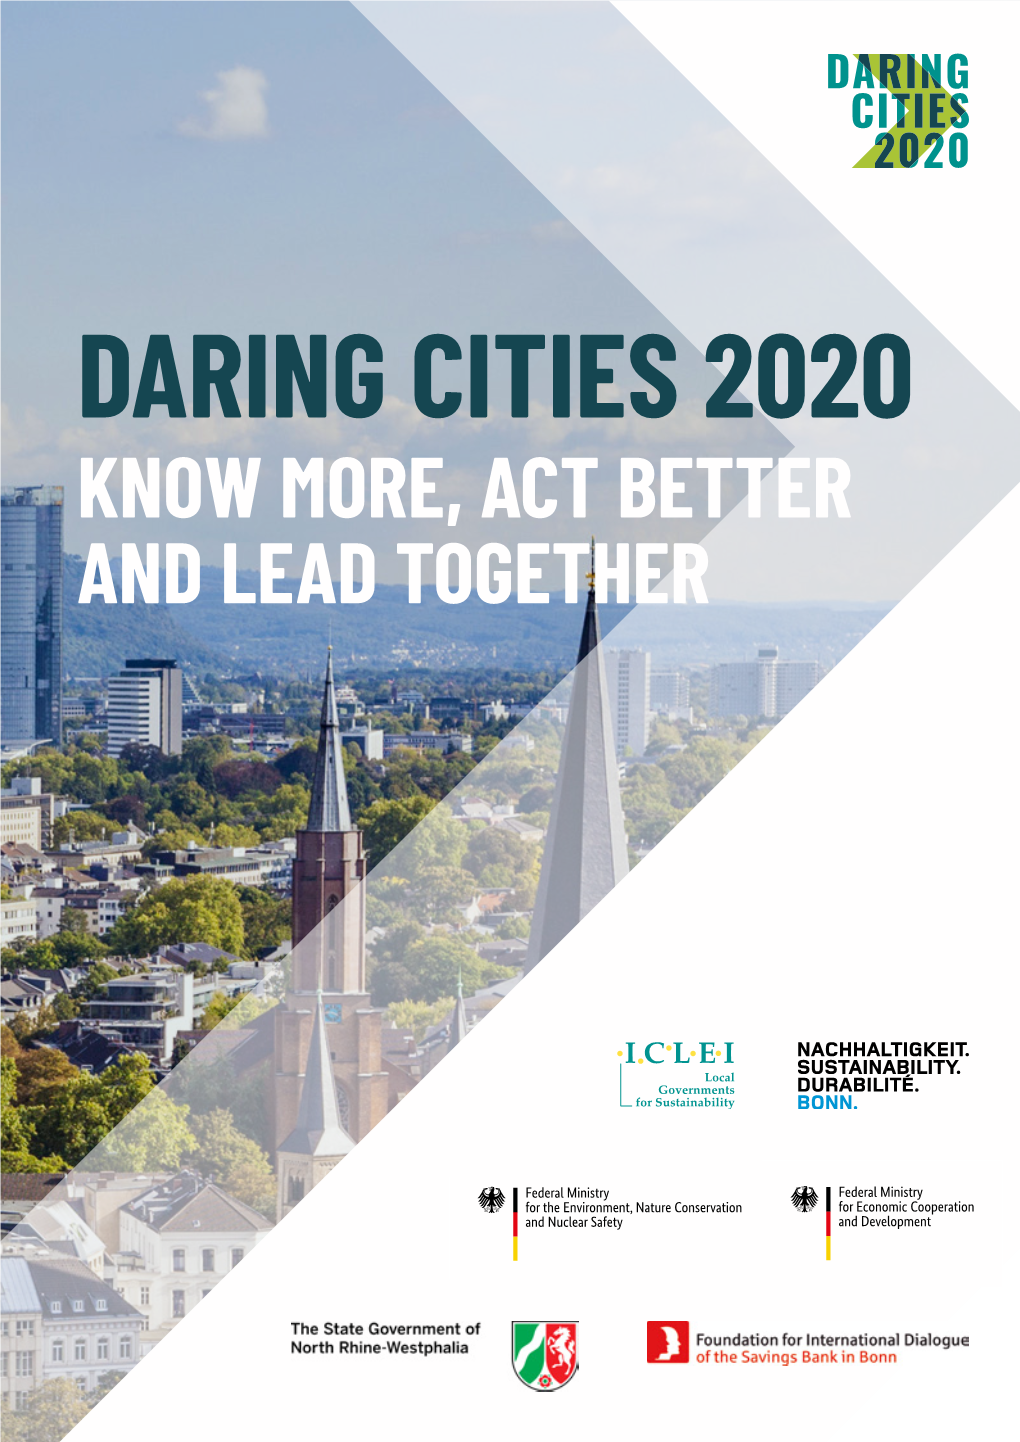 Daring Cities 2020: Know More, Act Better and Lead Together